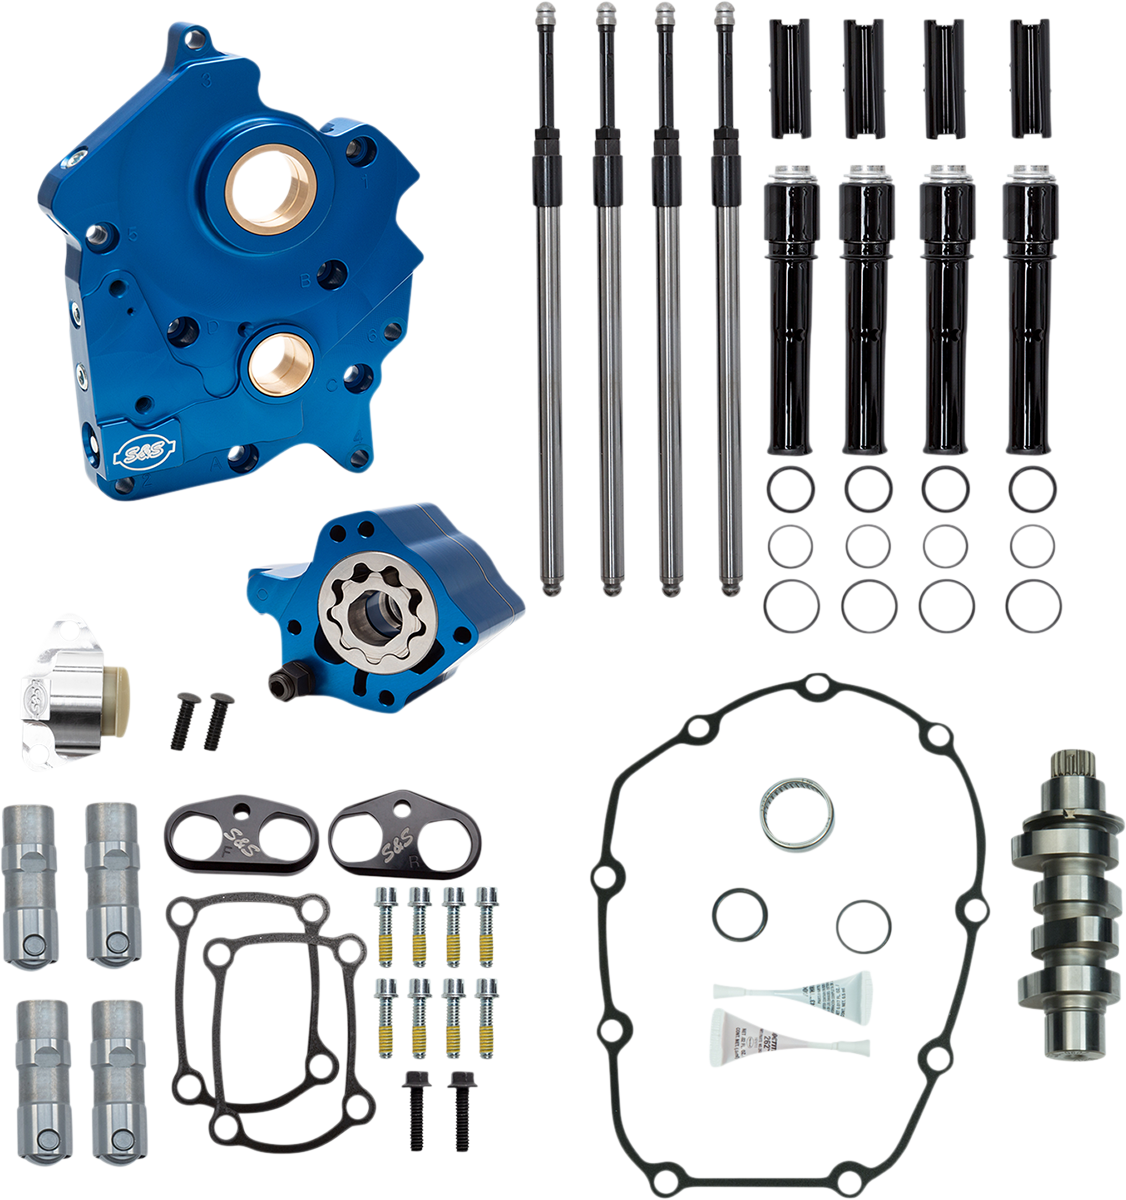 S&S CYCLE Cam Chest Kit with Plate M8 - Chain Drive - Water Cooled - 475 Cam - Black Pushrods  Road/Electra  Glide  / 310-1008B